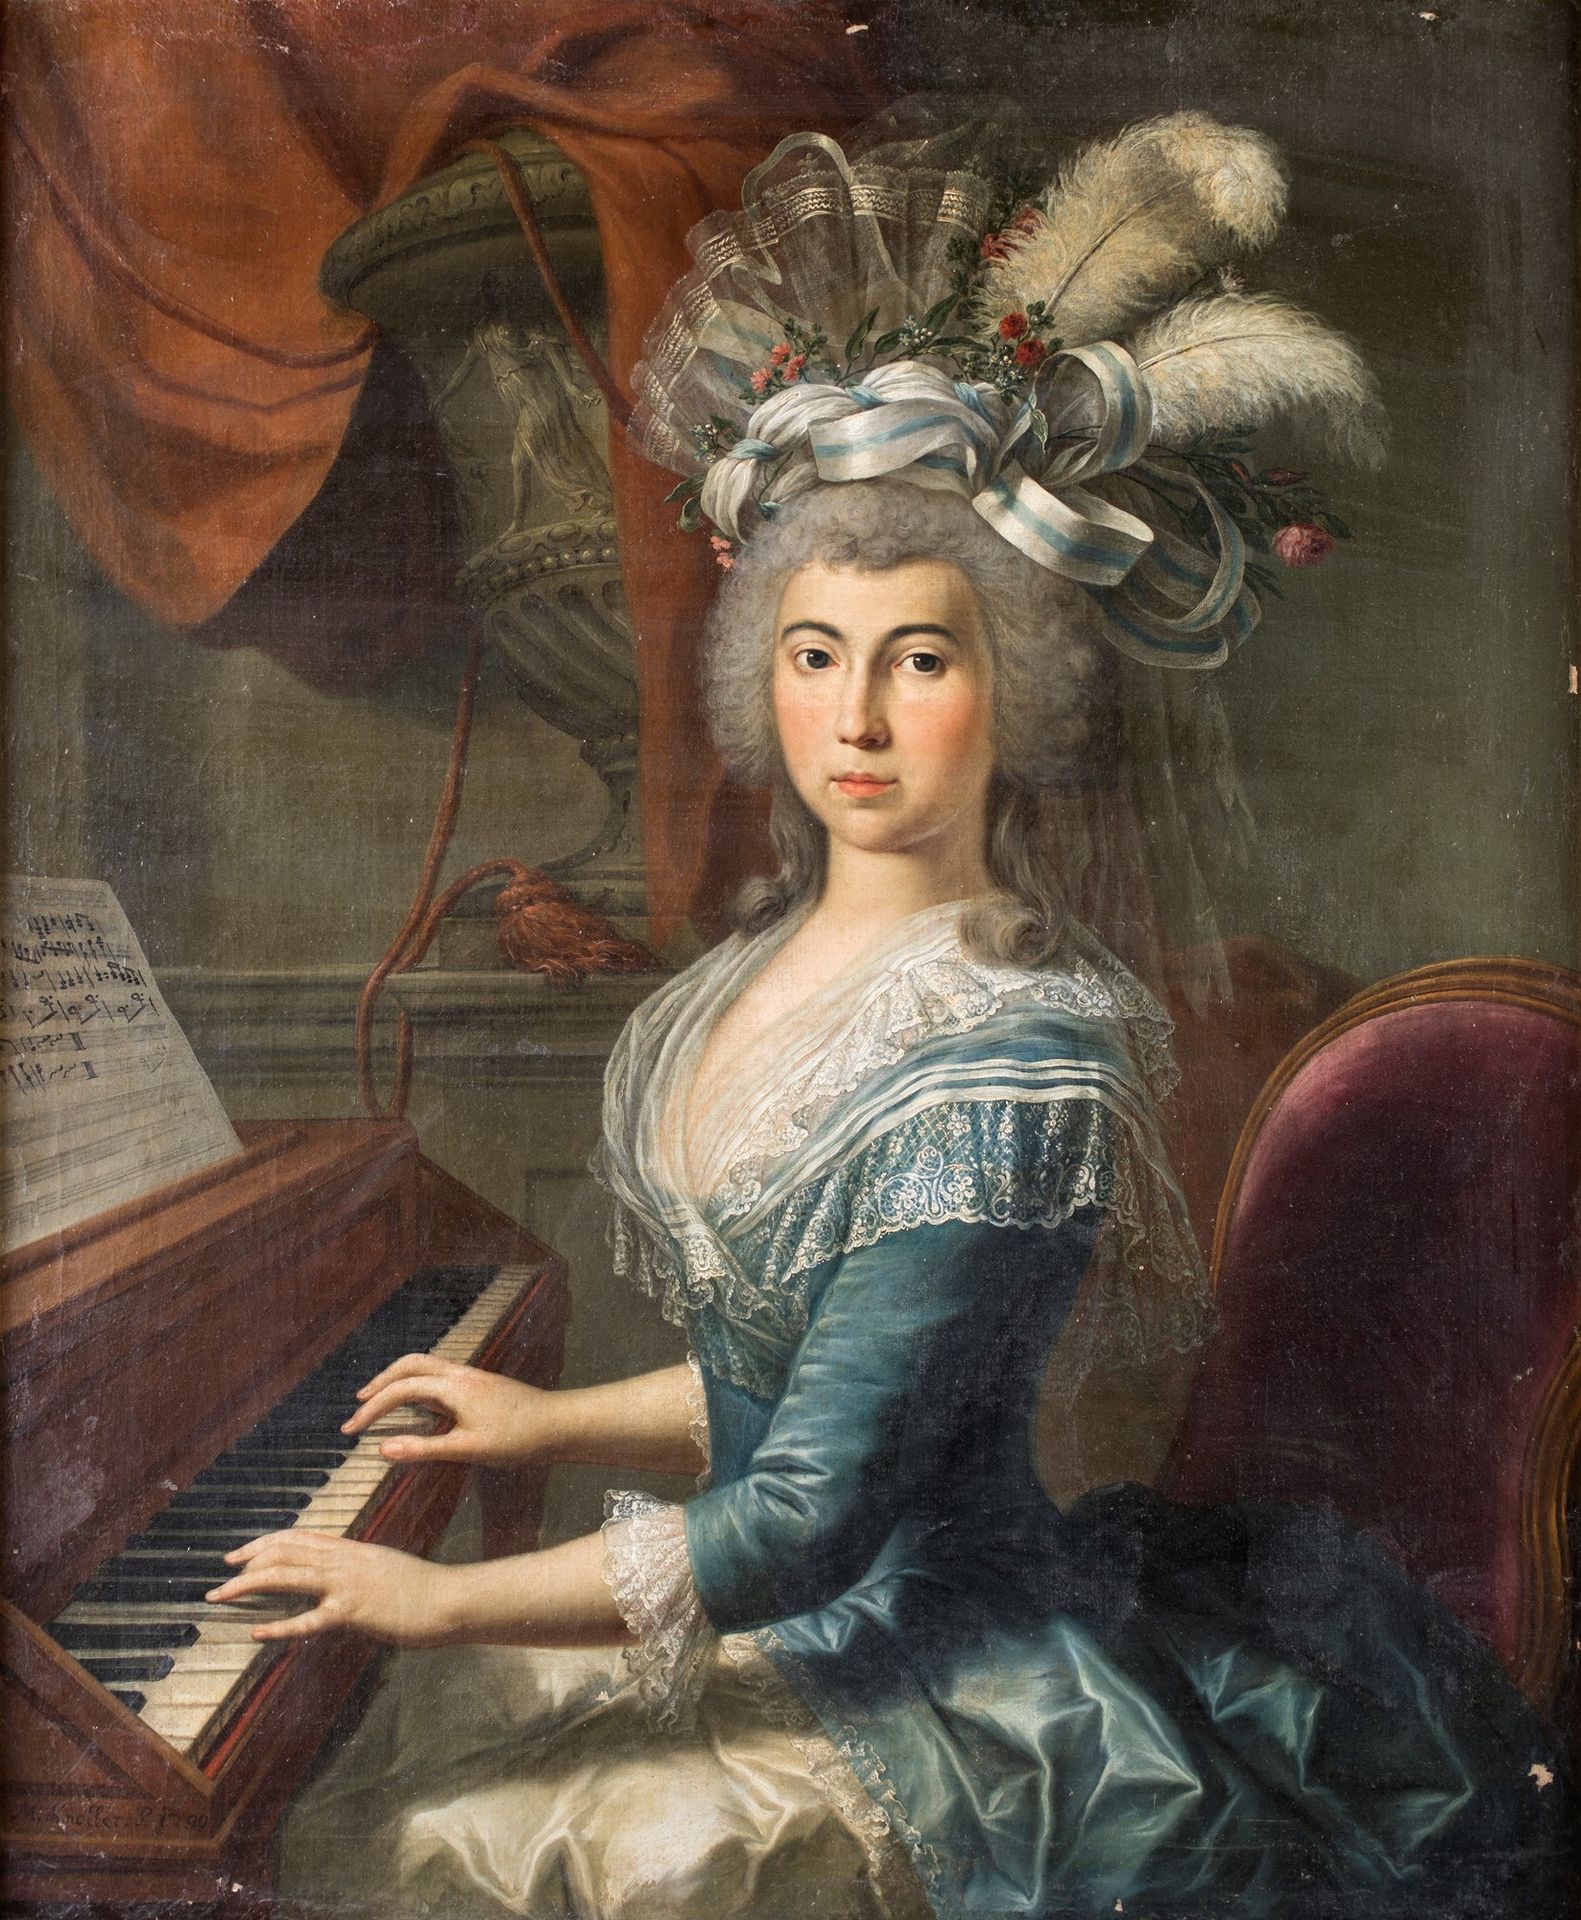 Martin Knoller Portrait of a Lady at the Piano 左下方有签名和日期：M. Knoller P. 1790